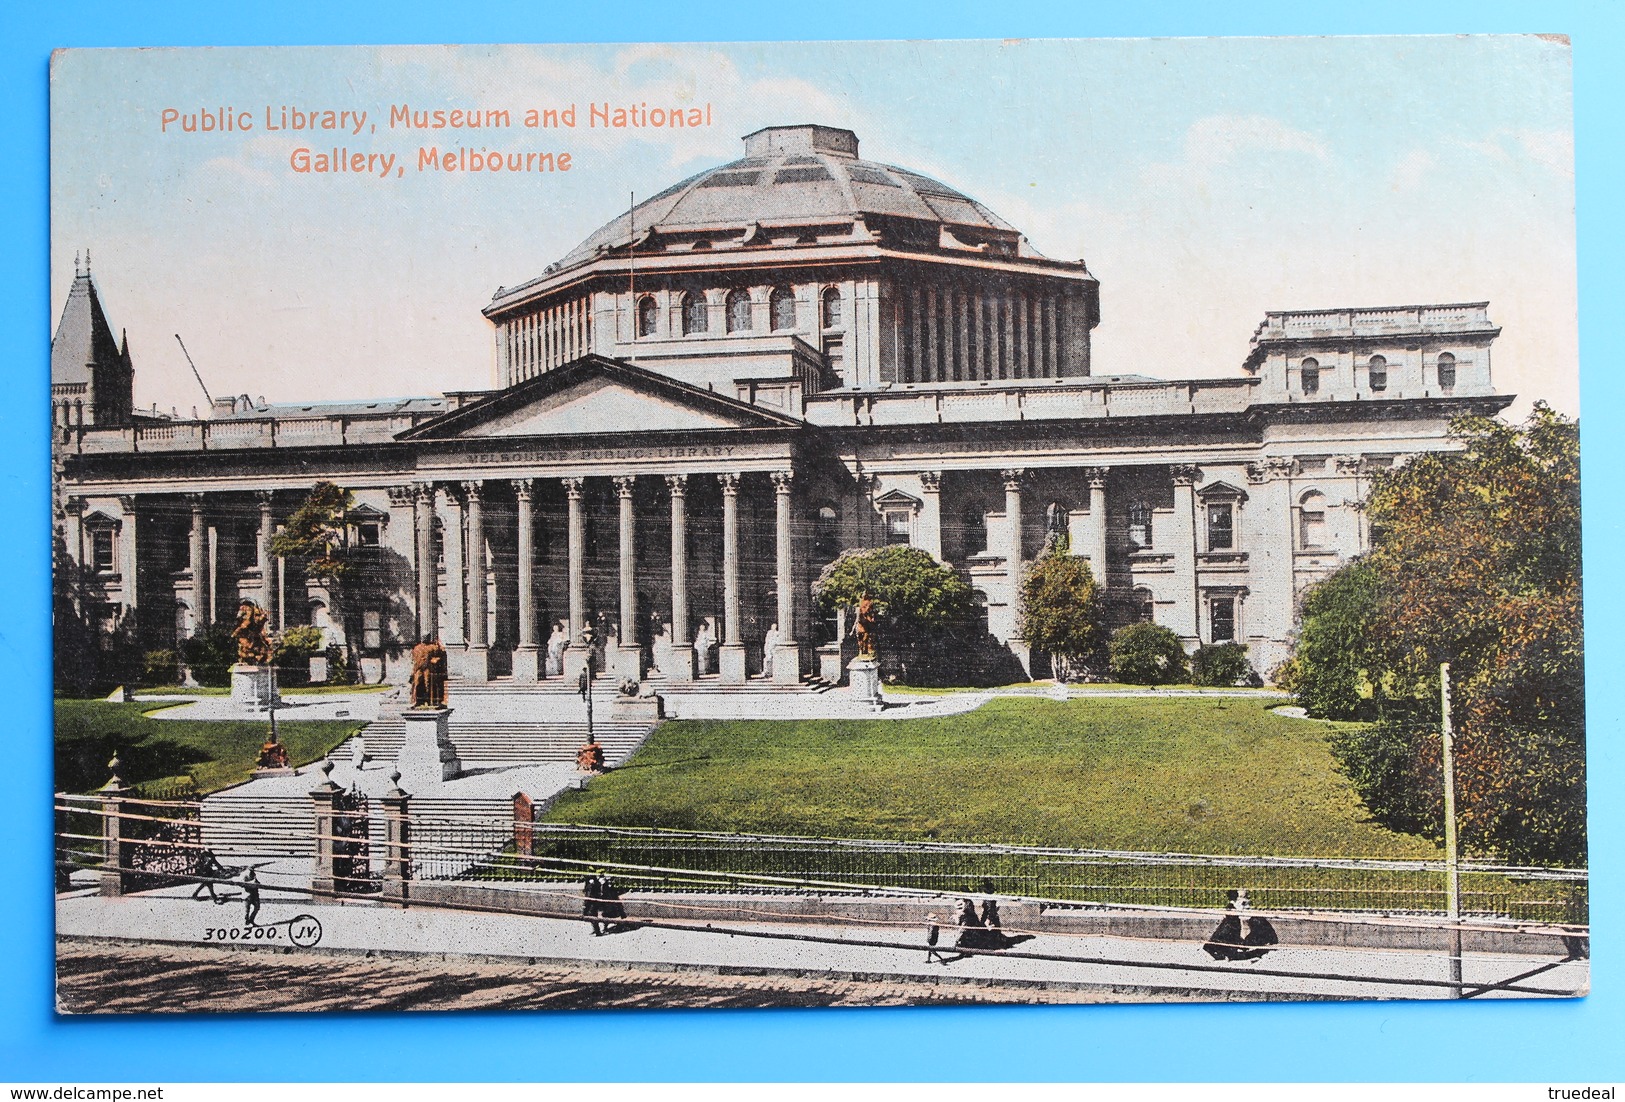 Public Library, Museum And National Gallery, Melbourne, Victoria, Australia - Melbourne